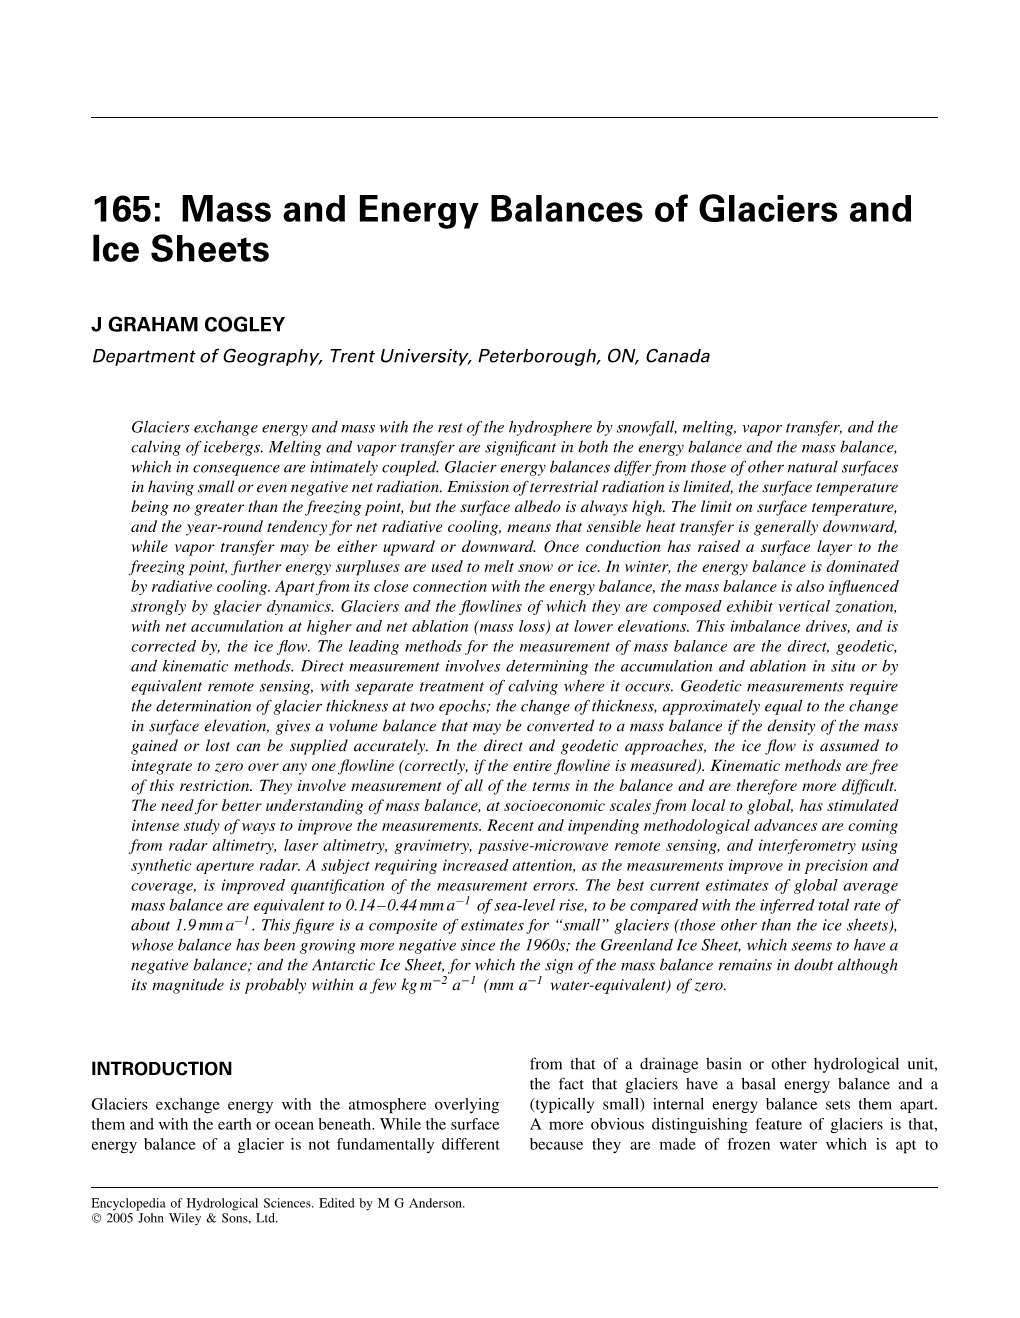 Mass and Energy Balances of Glaciers and Ice Sheets